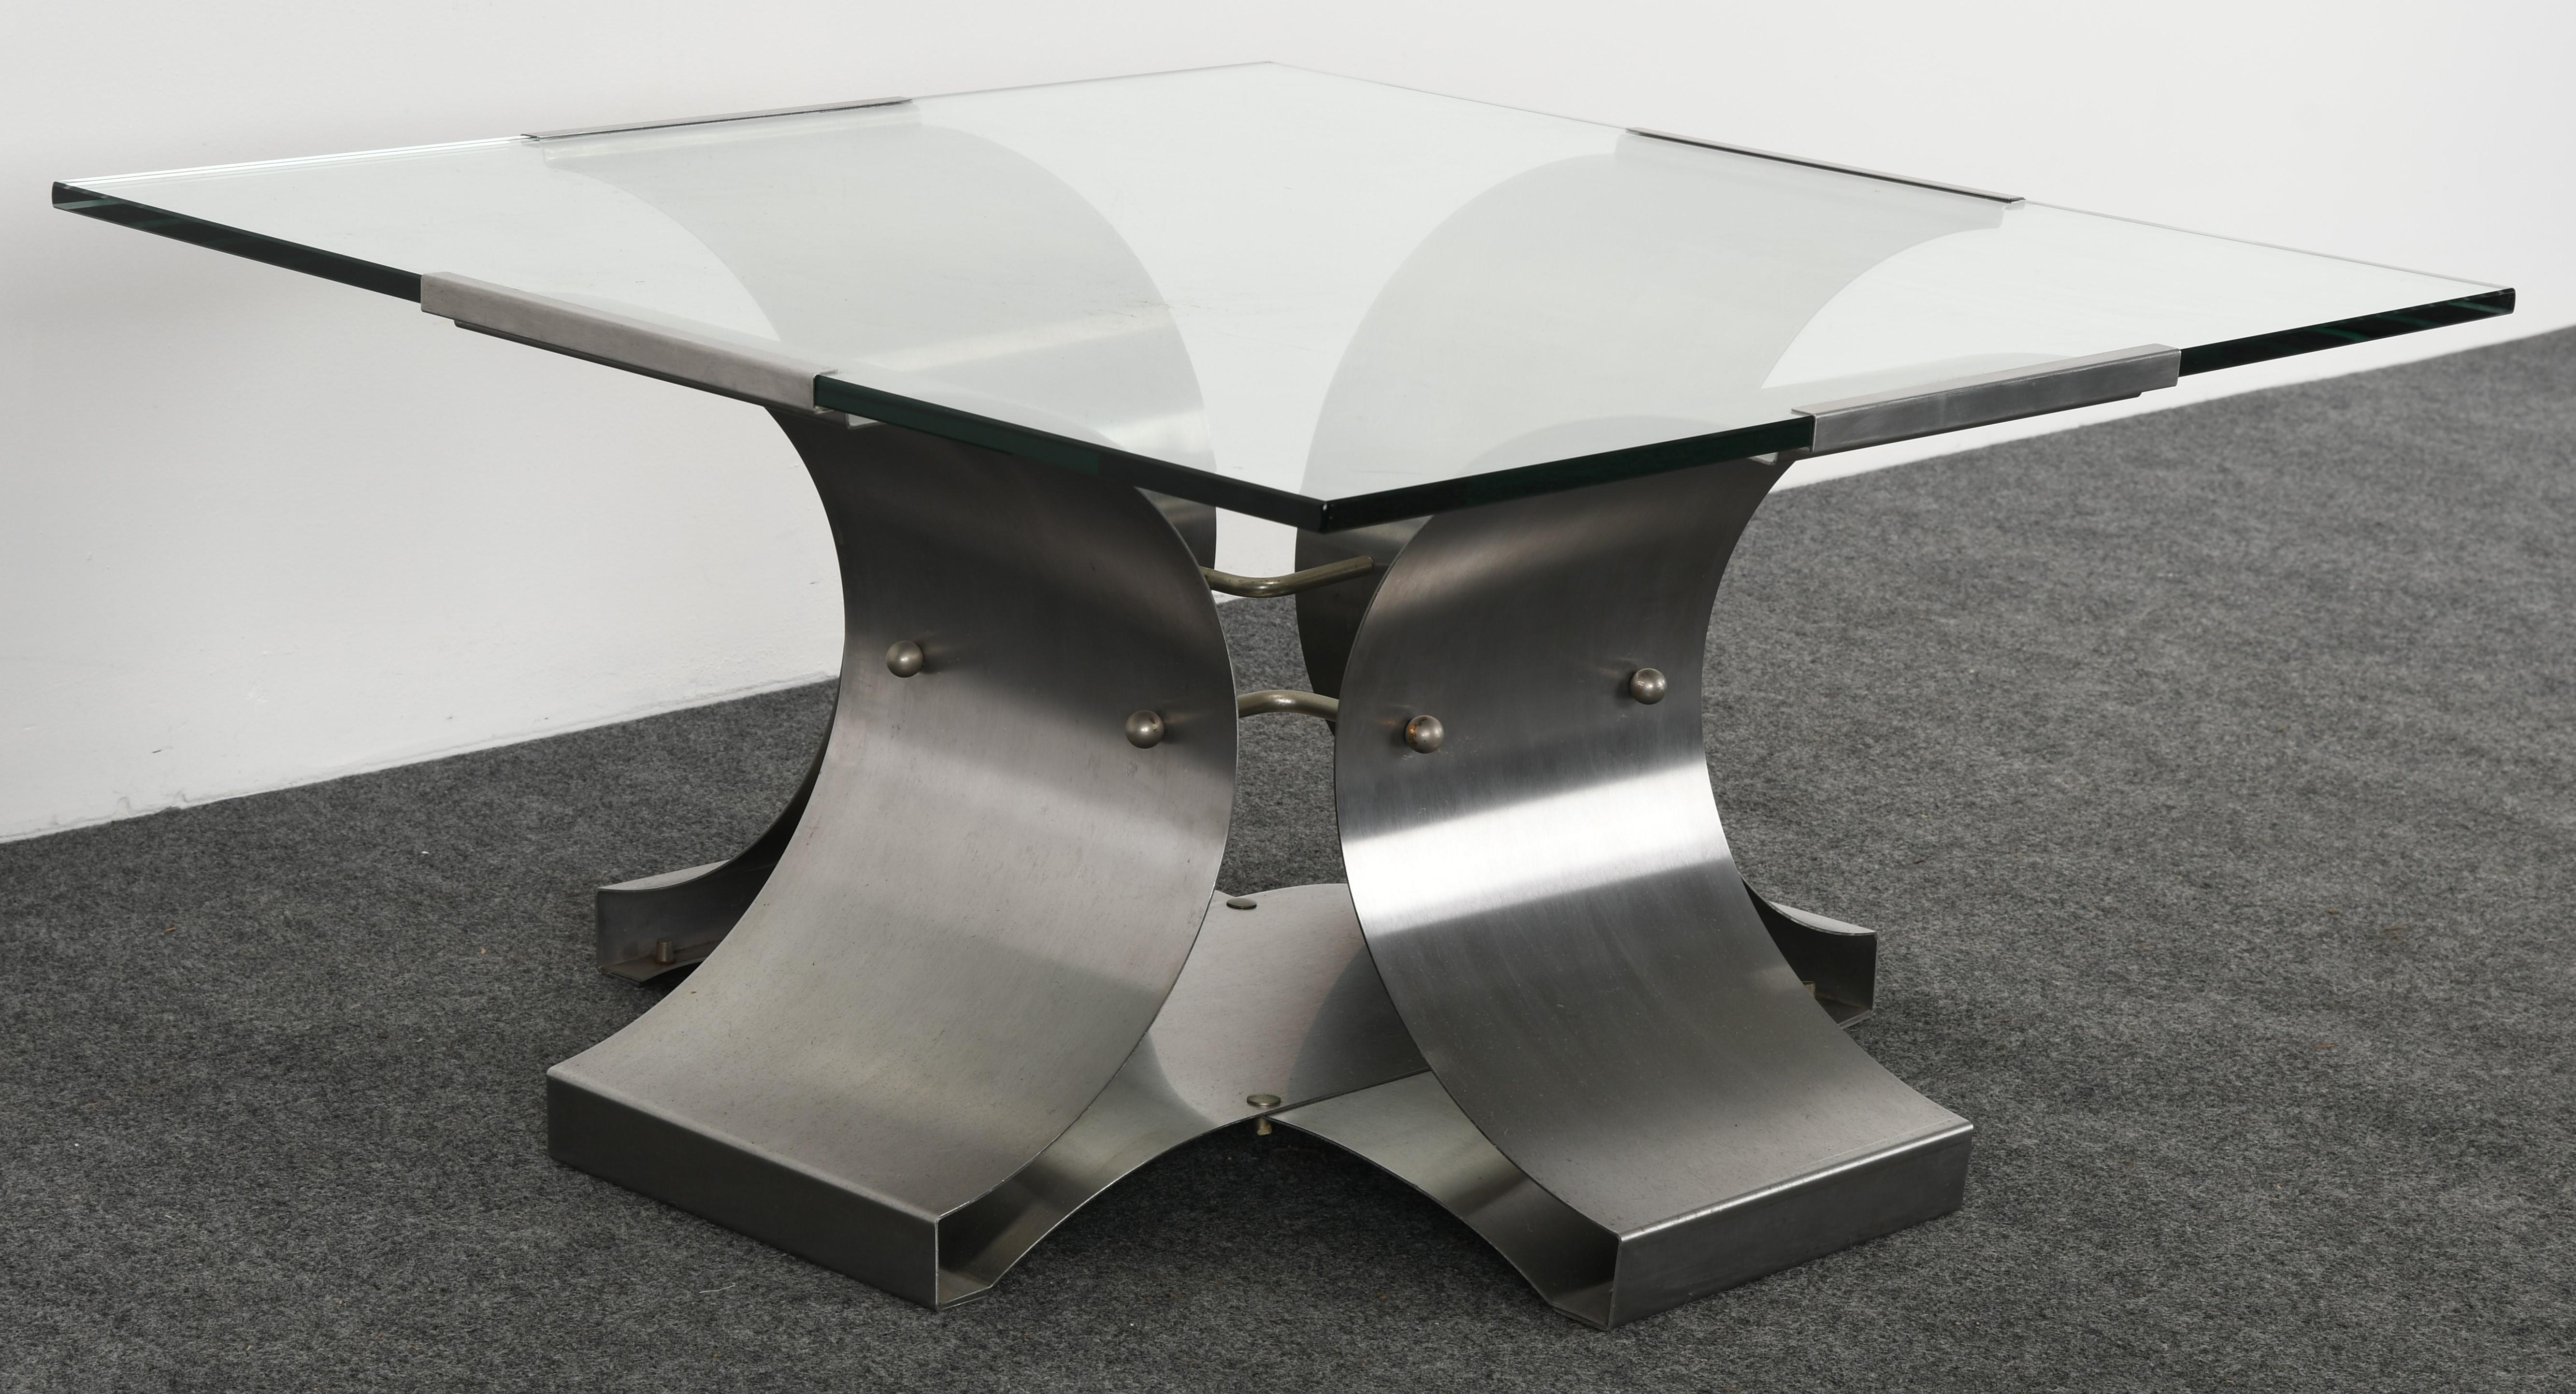 A chic X-base stainless steel coffee table by Francois Monnet, 1970s. This sculptural coffee table is crafted from brushed stainless steel. Good condition with age-appropriate wear. Several scratches but not distracting.

Dimensions: 16.25